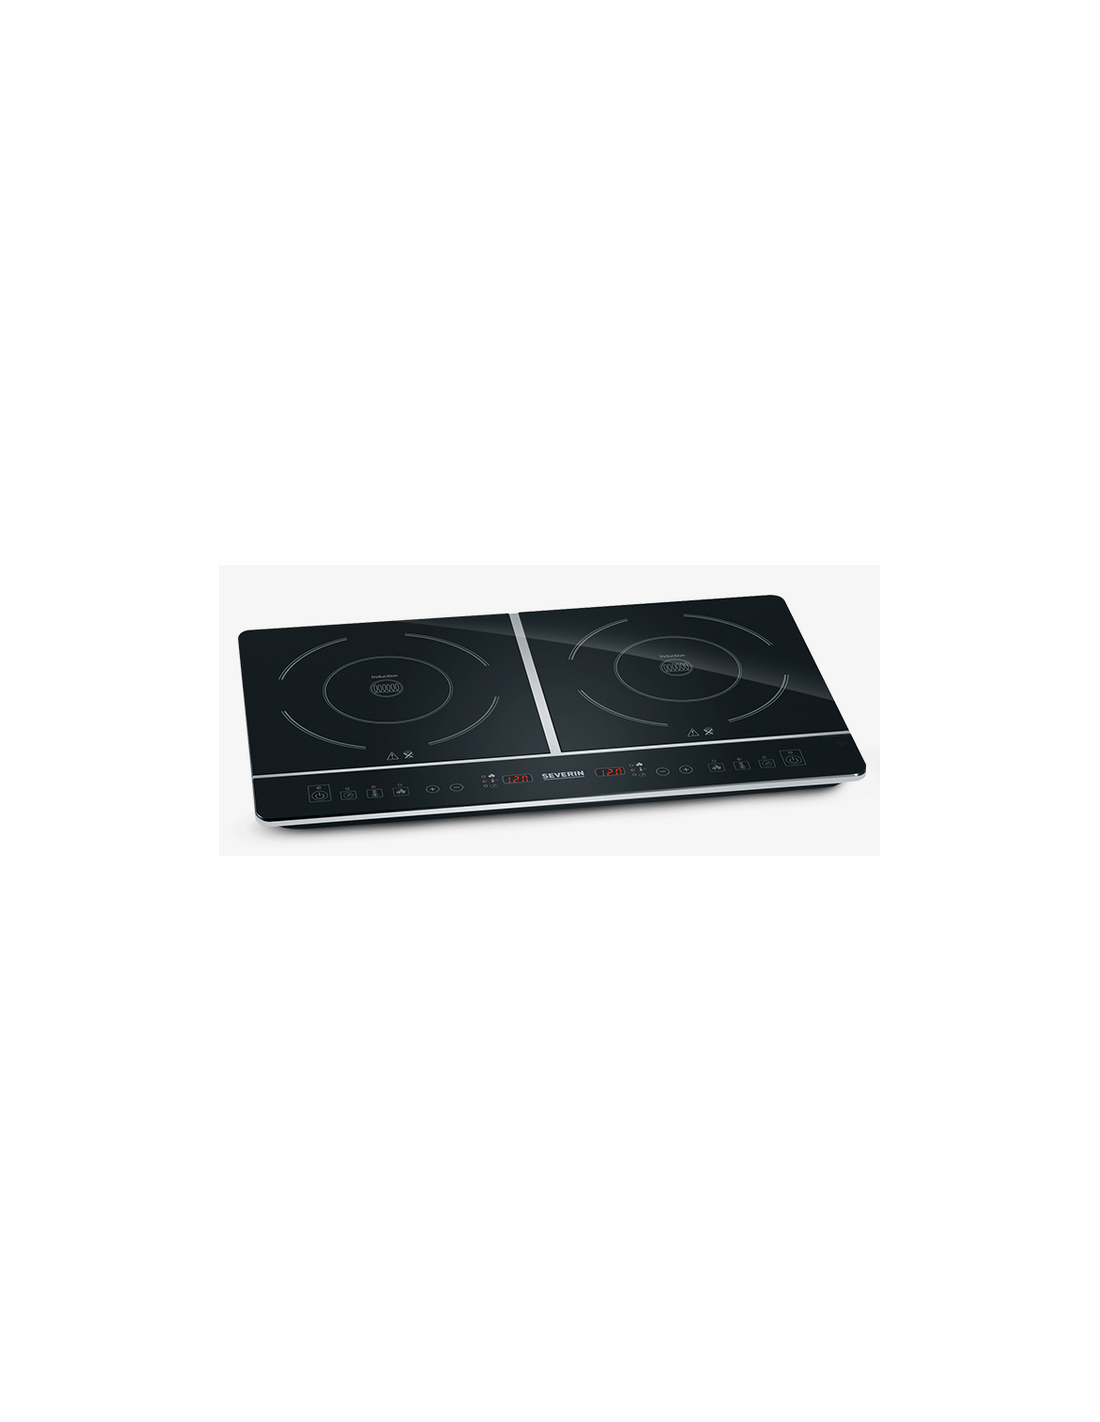 DOMINO POSE LIBRE SEVERIN A INDUCTION 3400W